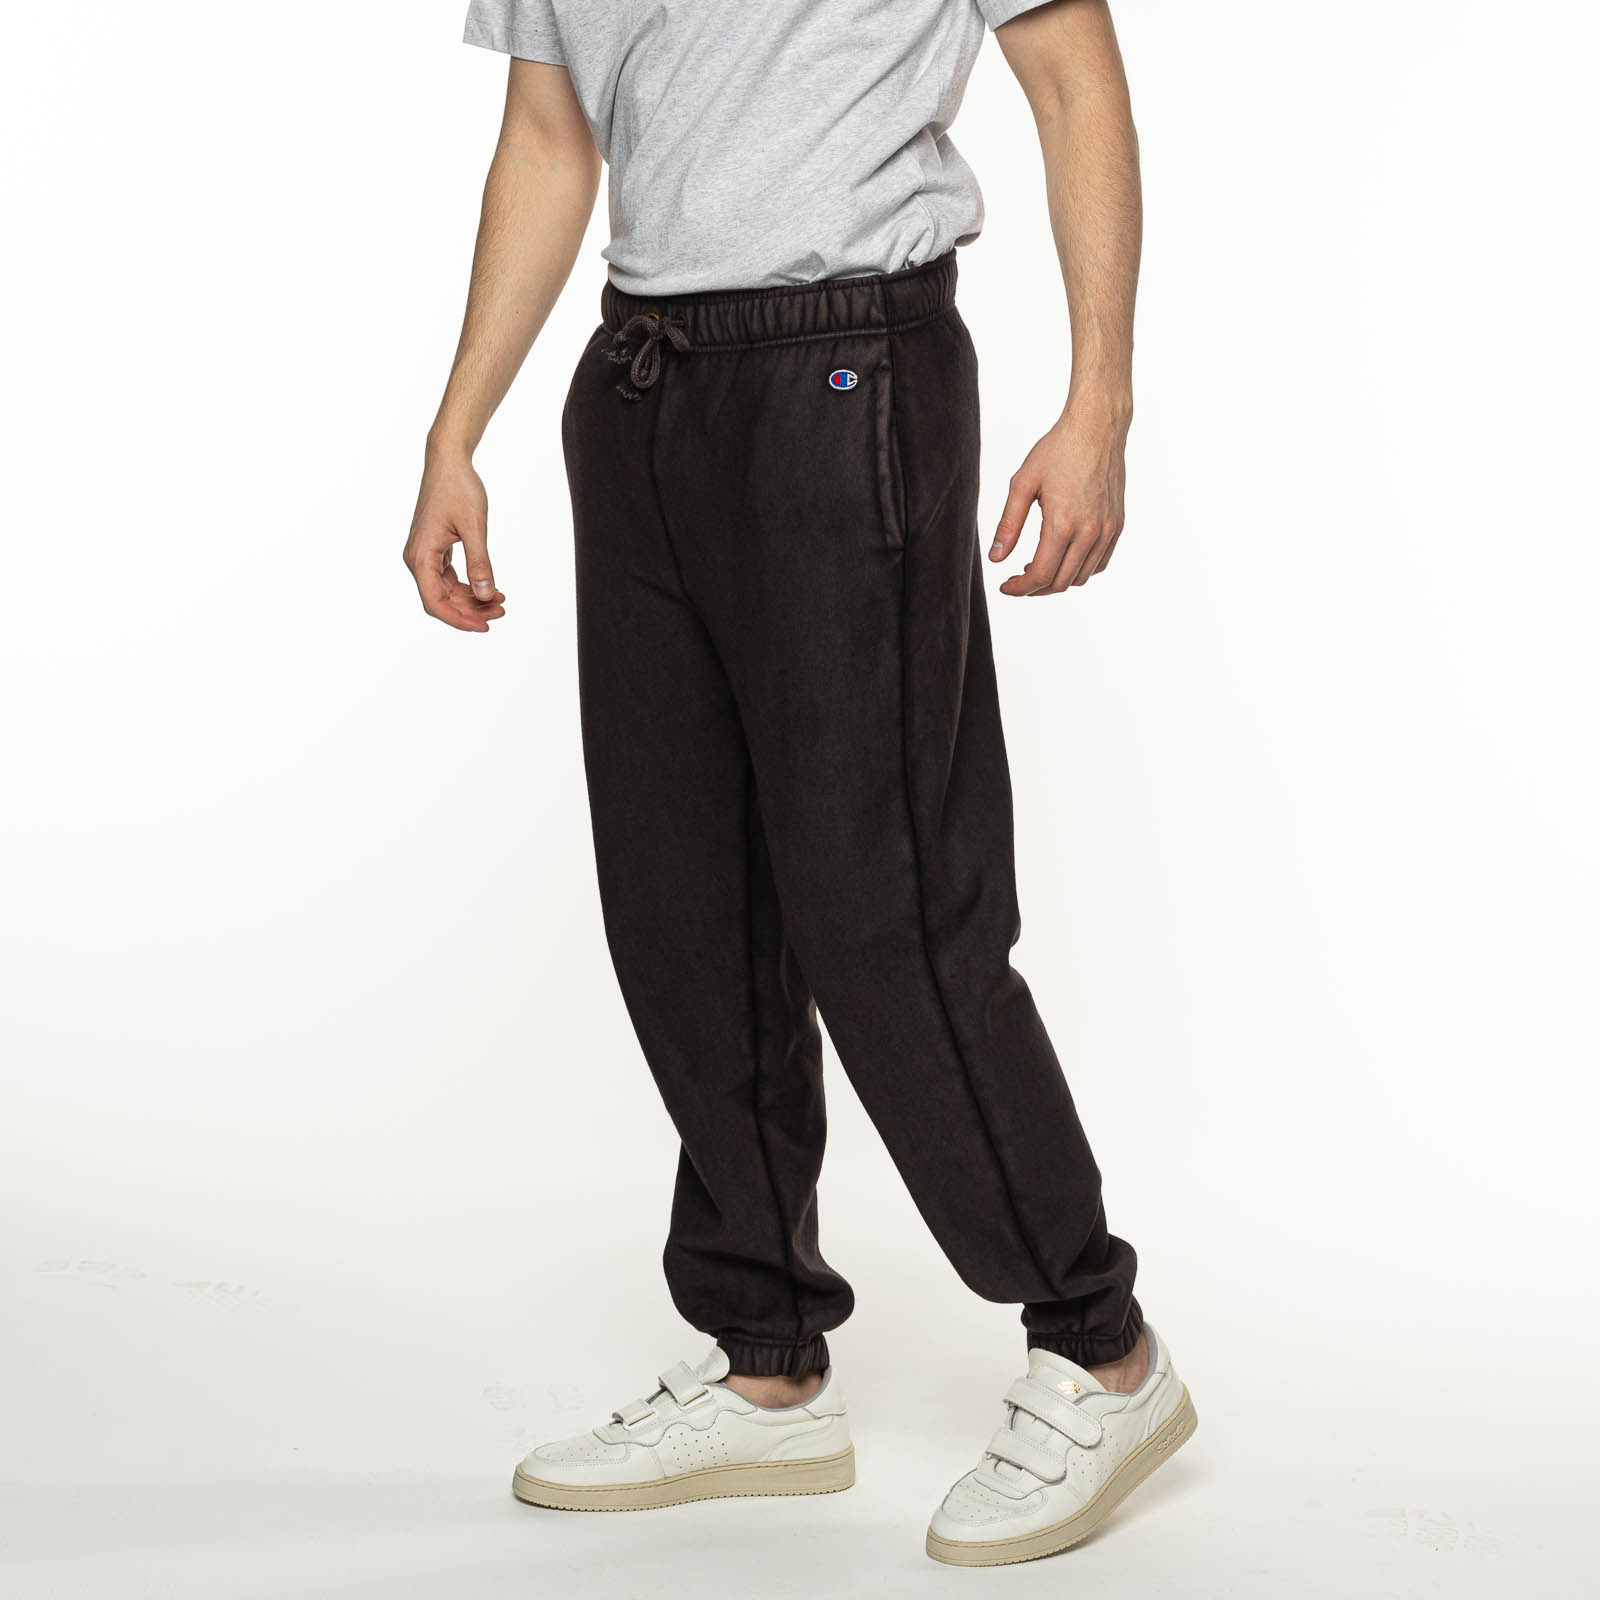 CHAMPION Men Brands Champion #Recommended \\ clothing \\ Cuff \\ clothing BLACK Pants Pants Men\'s Elastic #Brands \\ Champion \\ \\ brands Men |